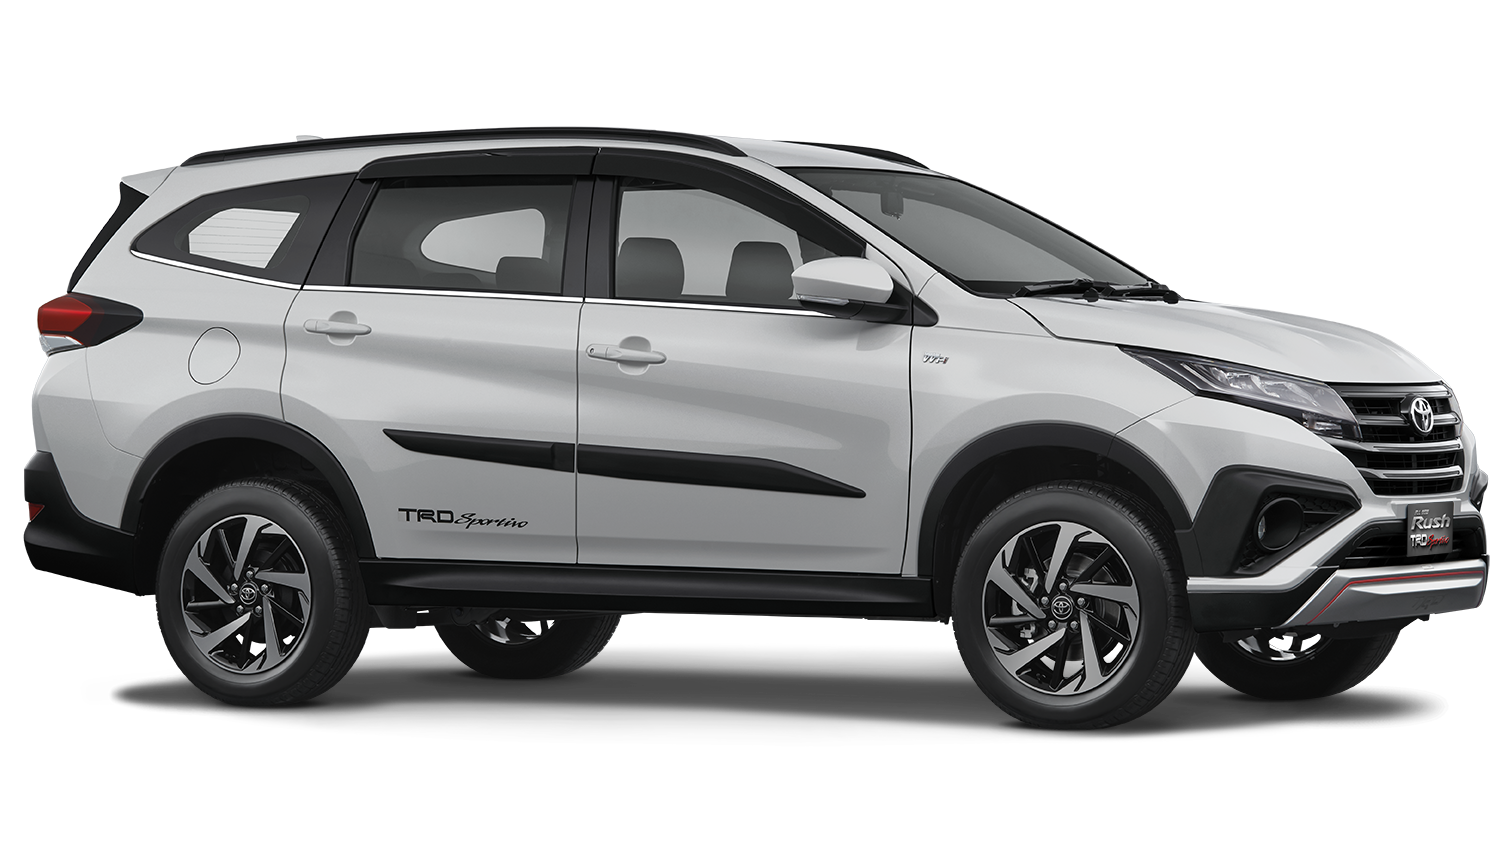 New 2018 Toyota Rush SUV makes debut in Indonesia Paul Tan - Image 742841